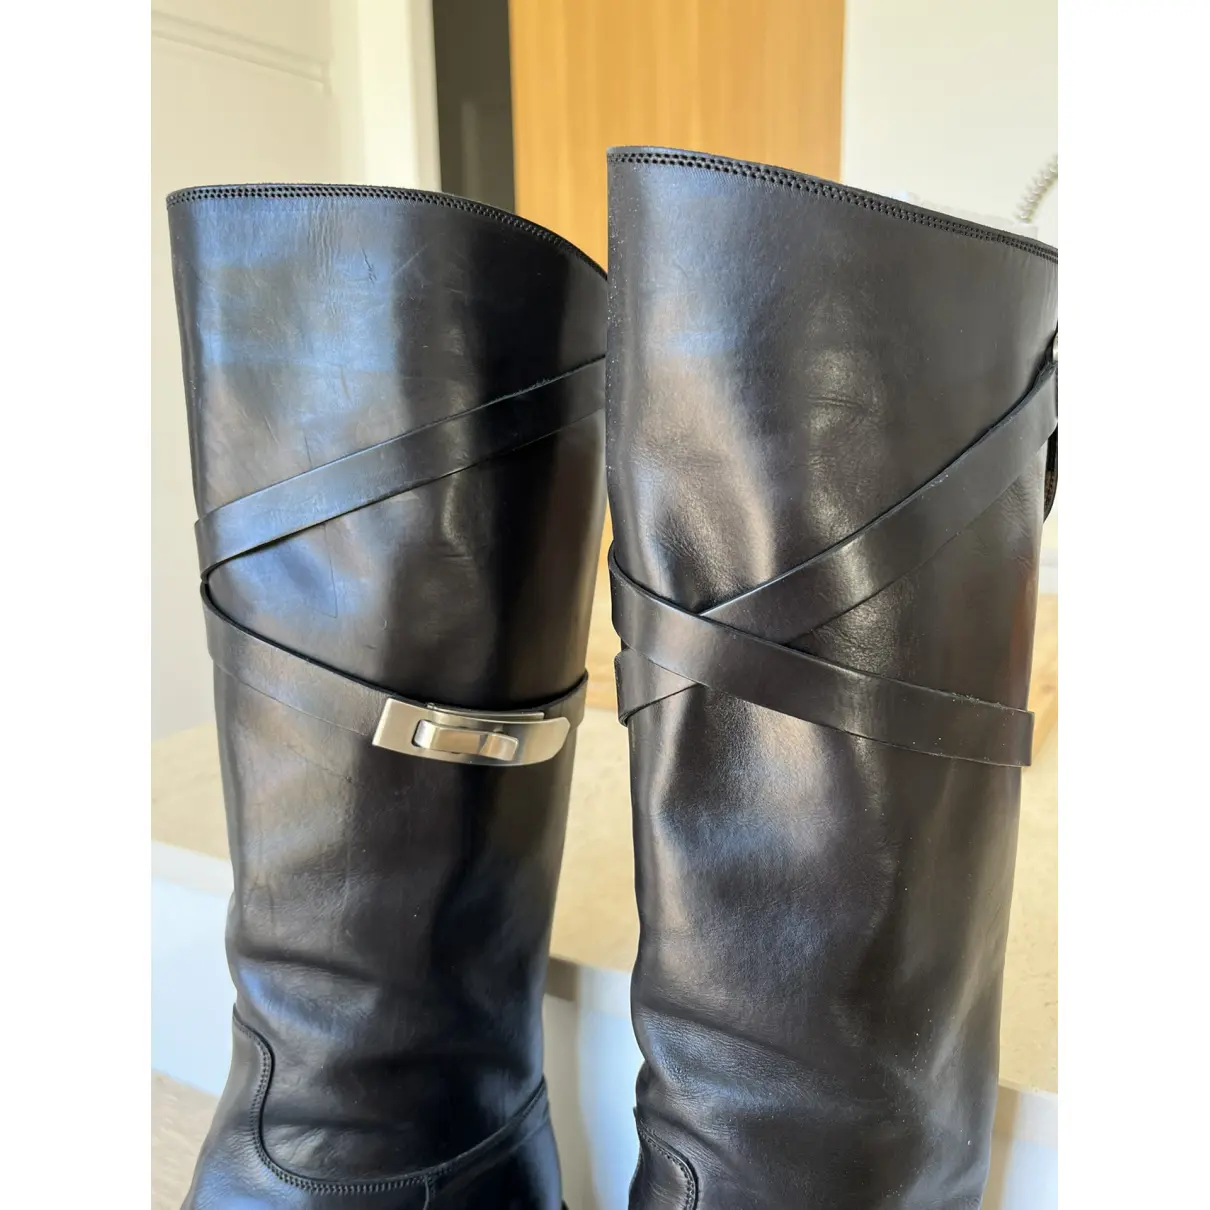 Buy Sartore Leather riding boots online